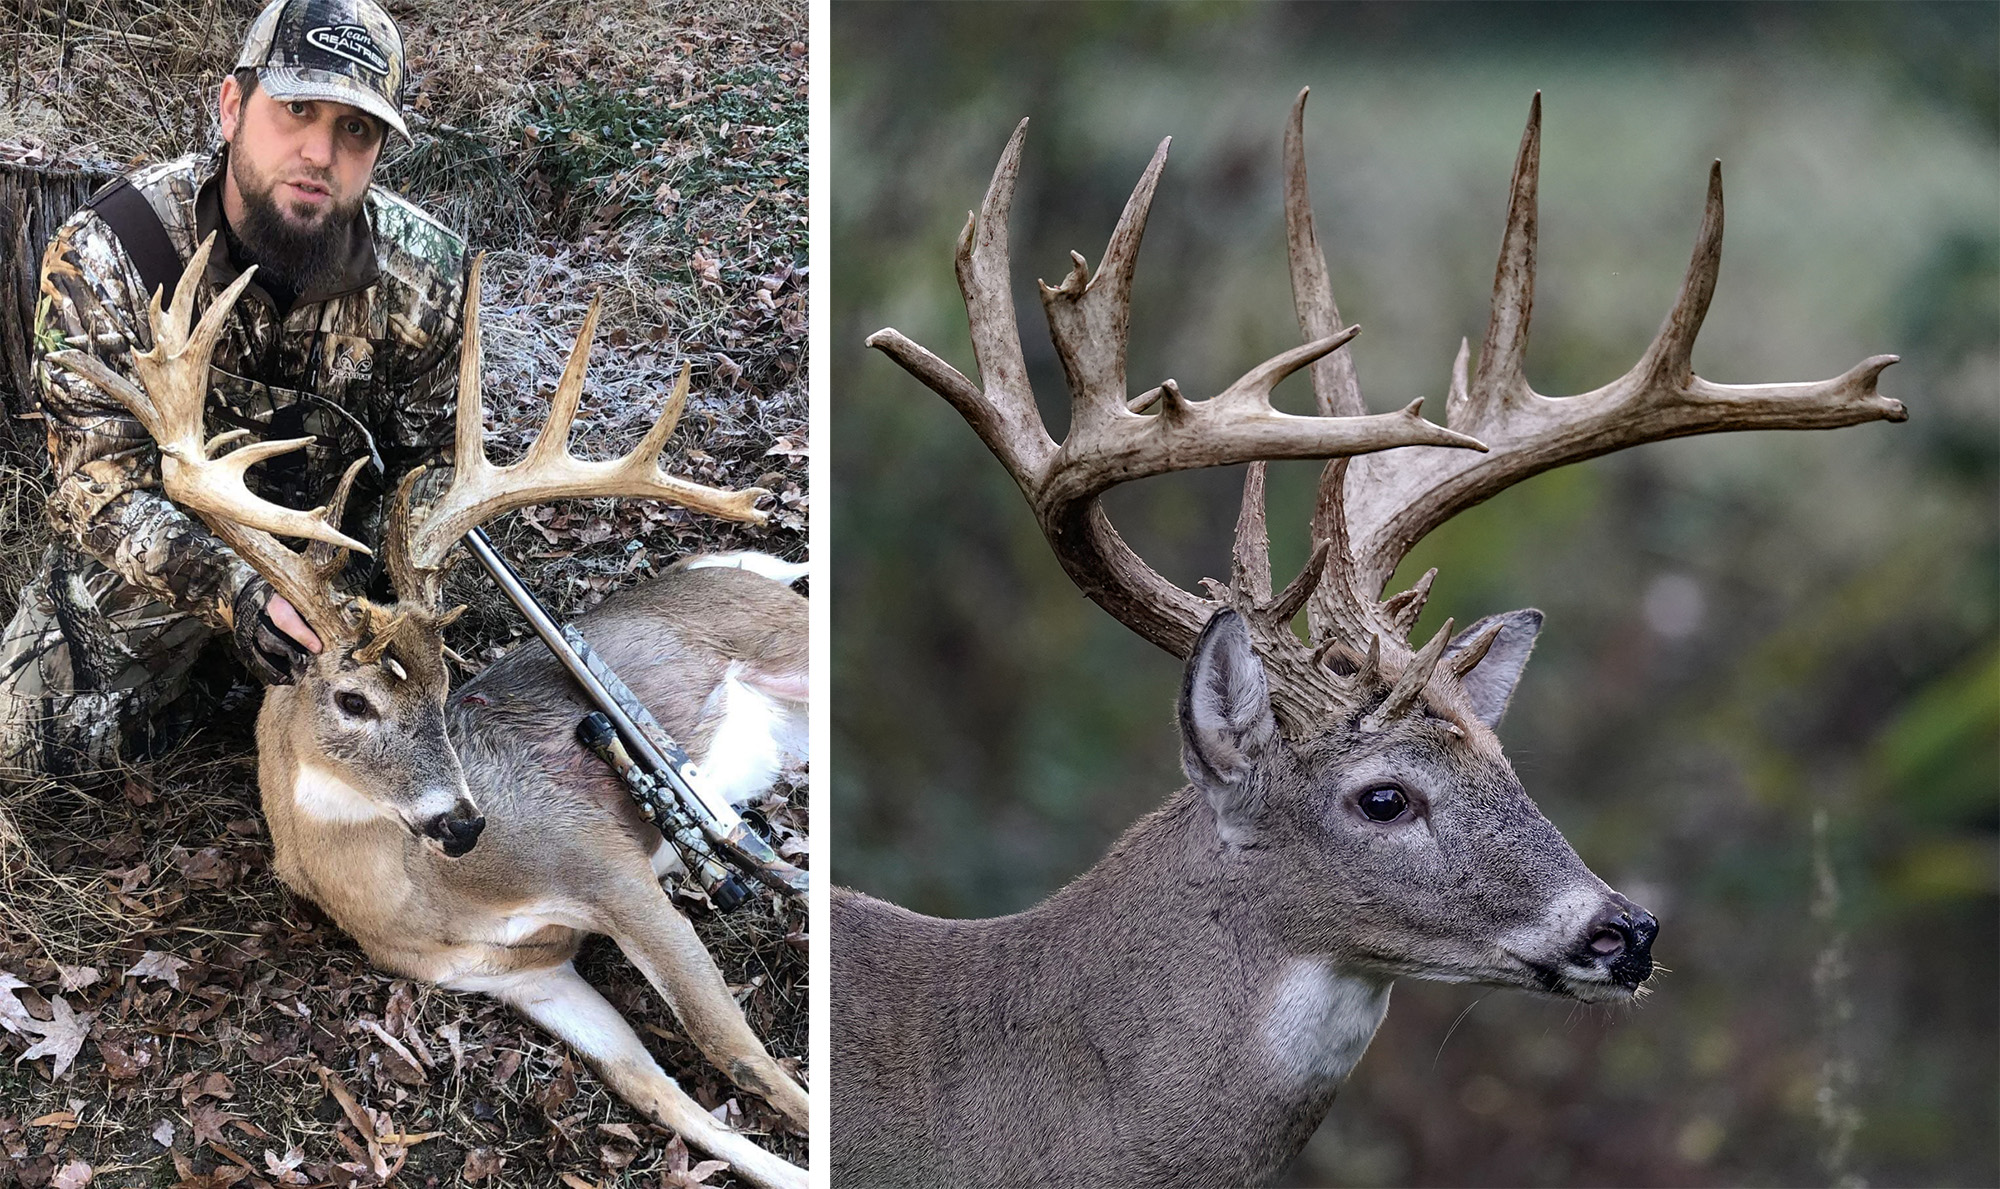 The Hollywood Cemetery buck compared to the James Walters buck.